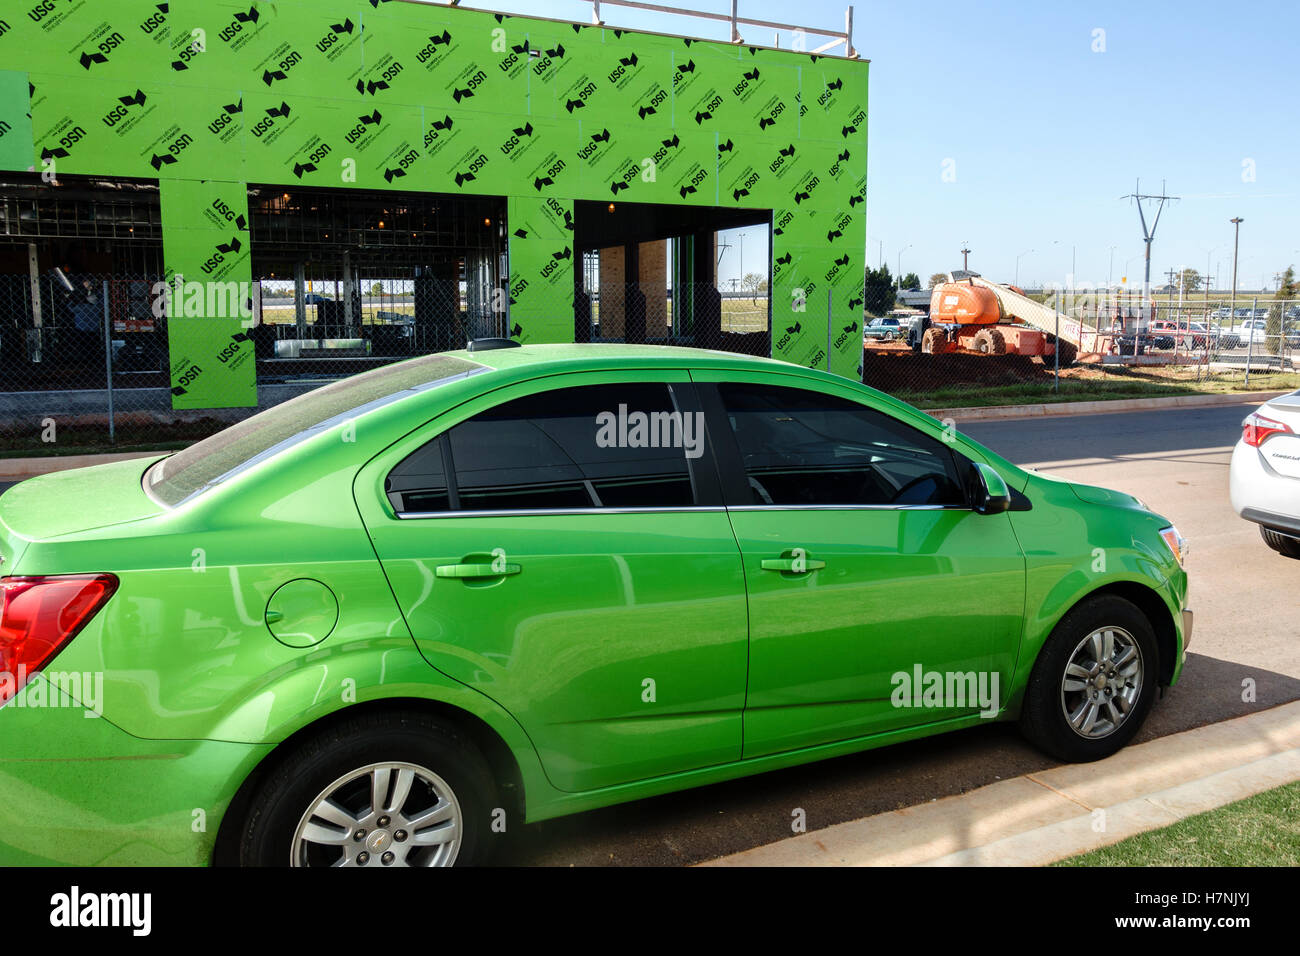 Unusual coincidence of lime green matching colors in an automobile and a building under construction. Oklahoma, USA. Stock Photo